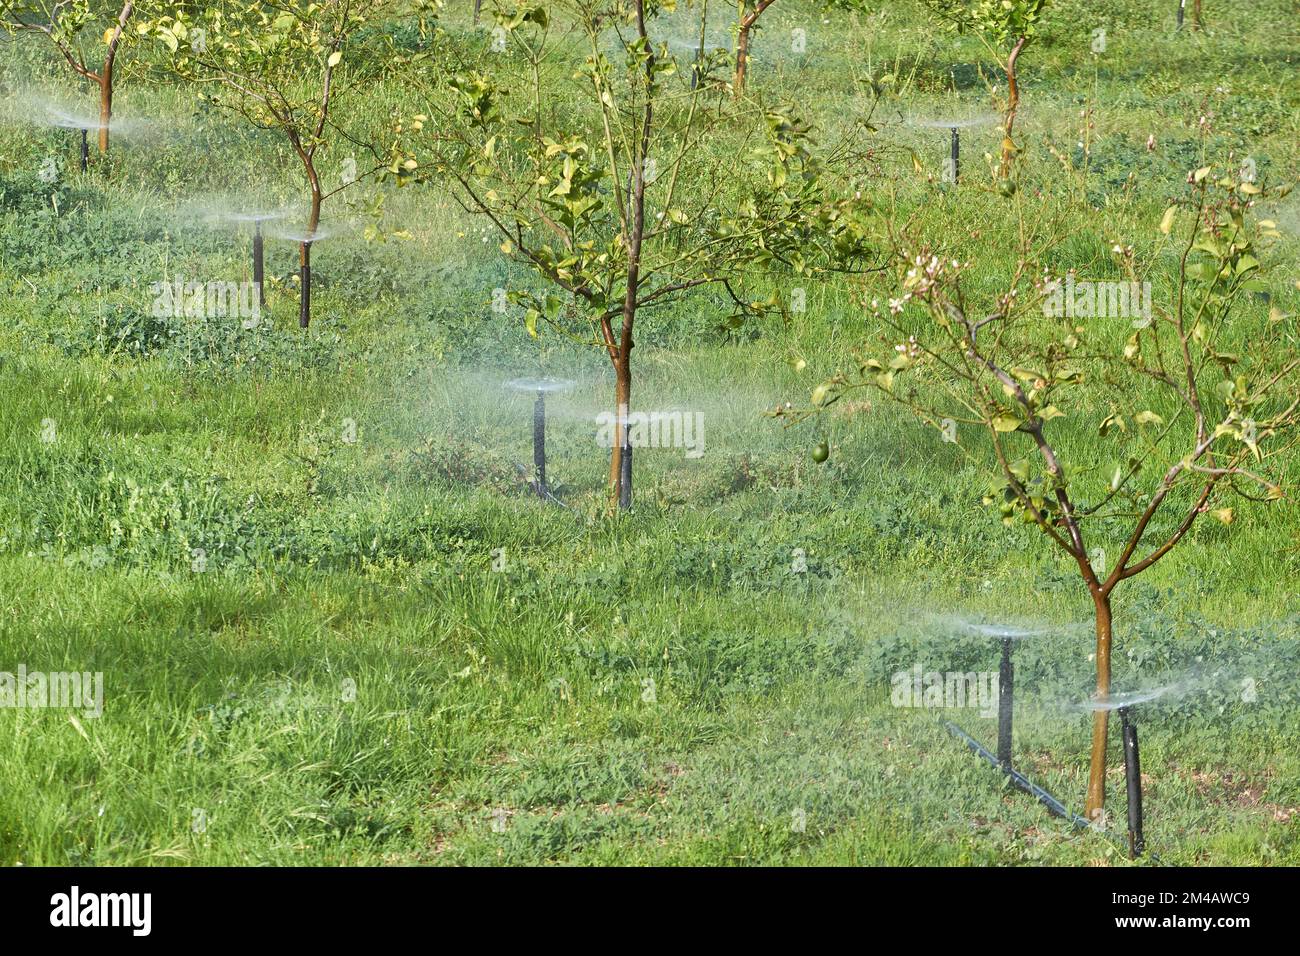 Irrigation, summertime sprinkling, fruit trees, green meadow in an orchard, Peloponnese, Greece Stock Photo